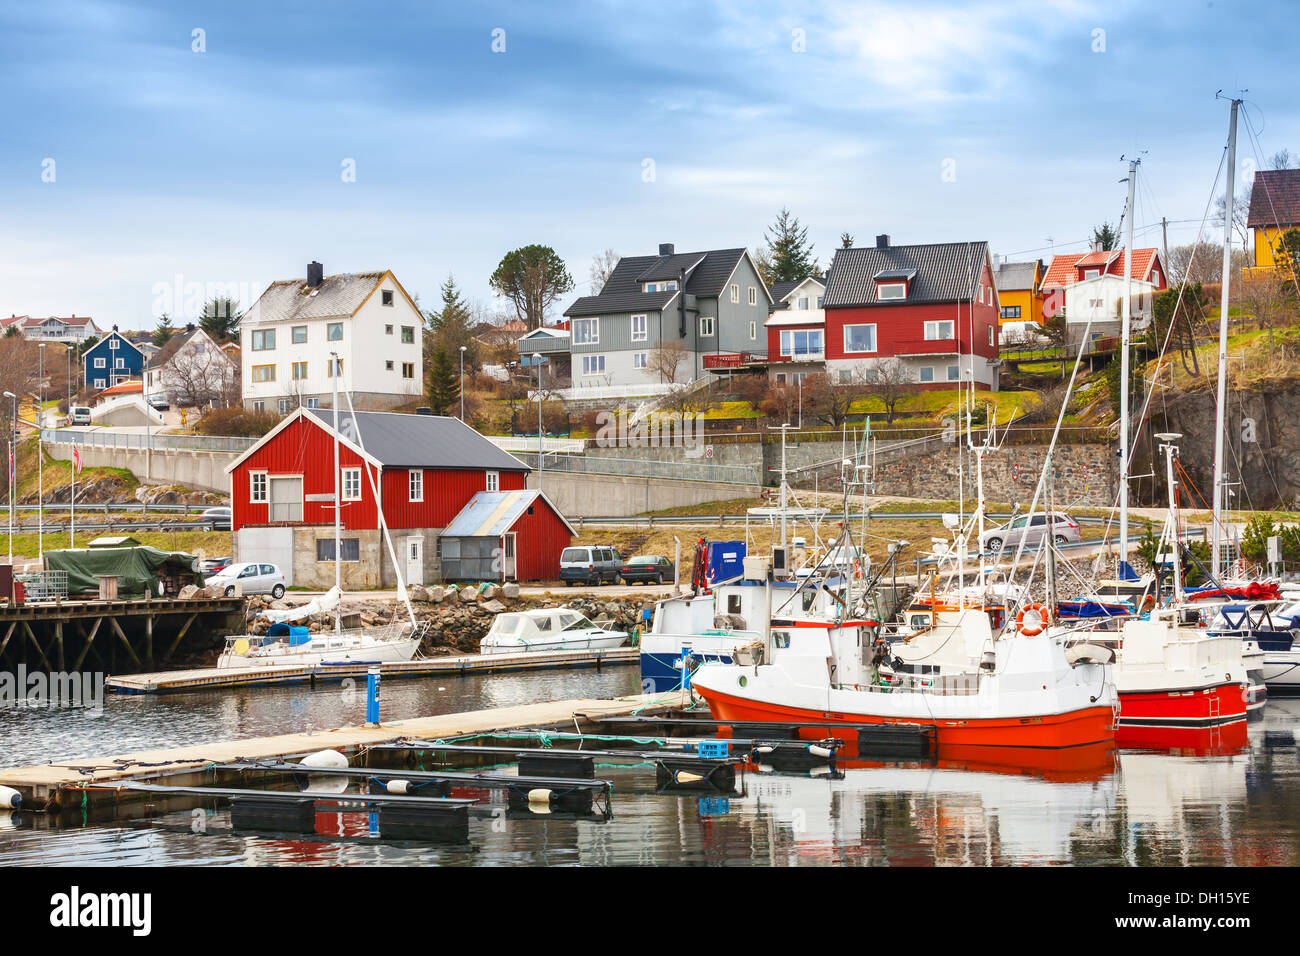 Small red and white fishing boats stand moored in Norway fishing town Rorvik Stock Photo